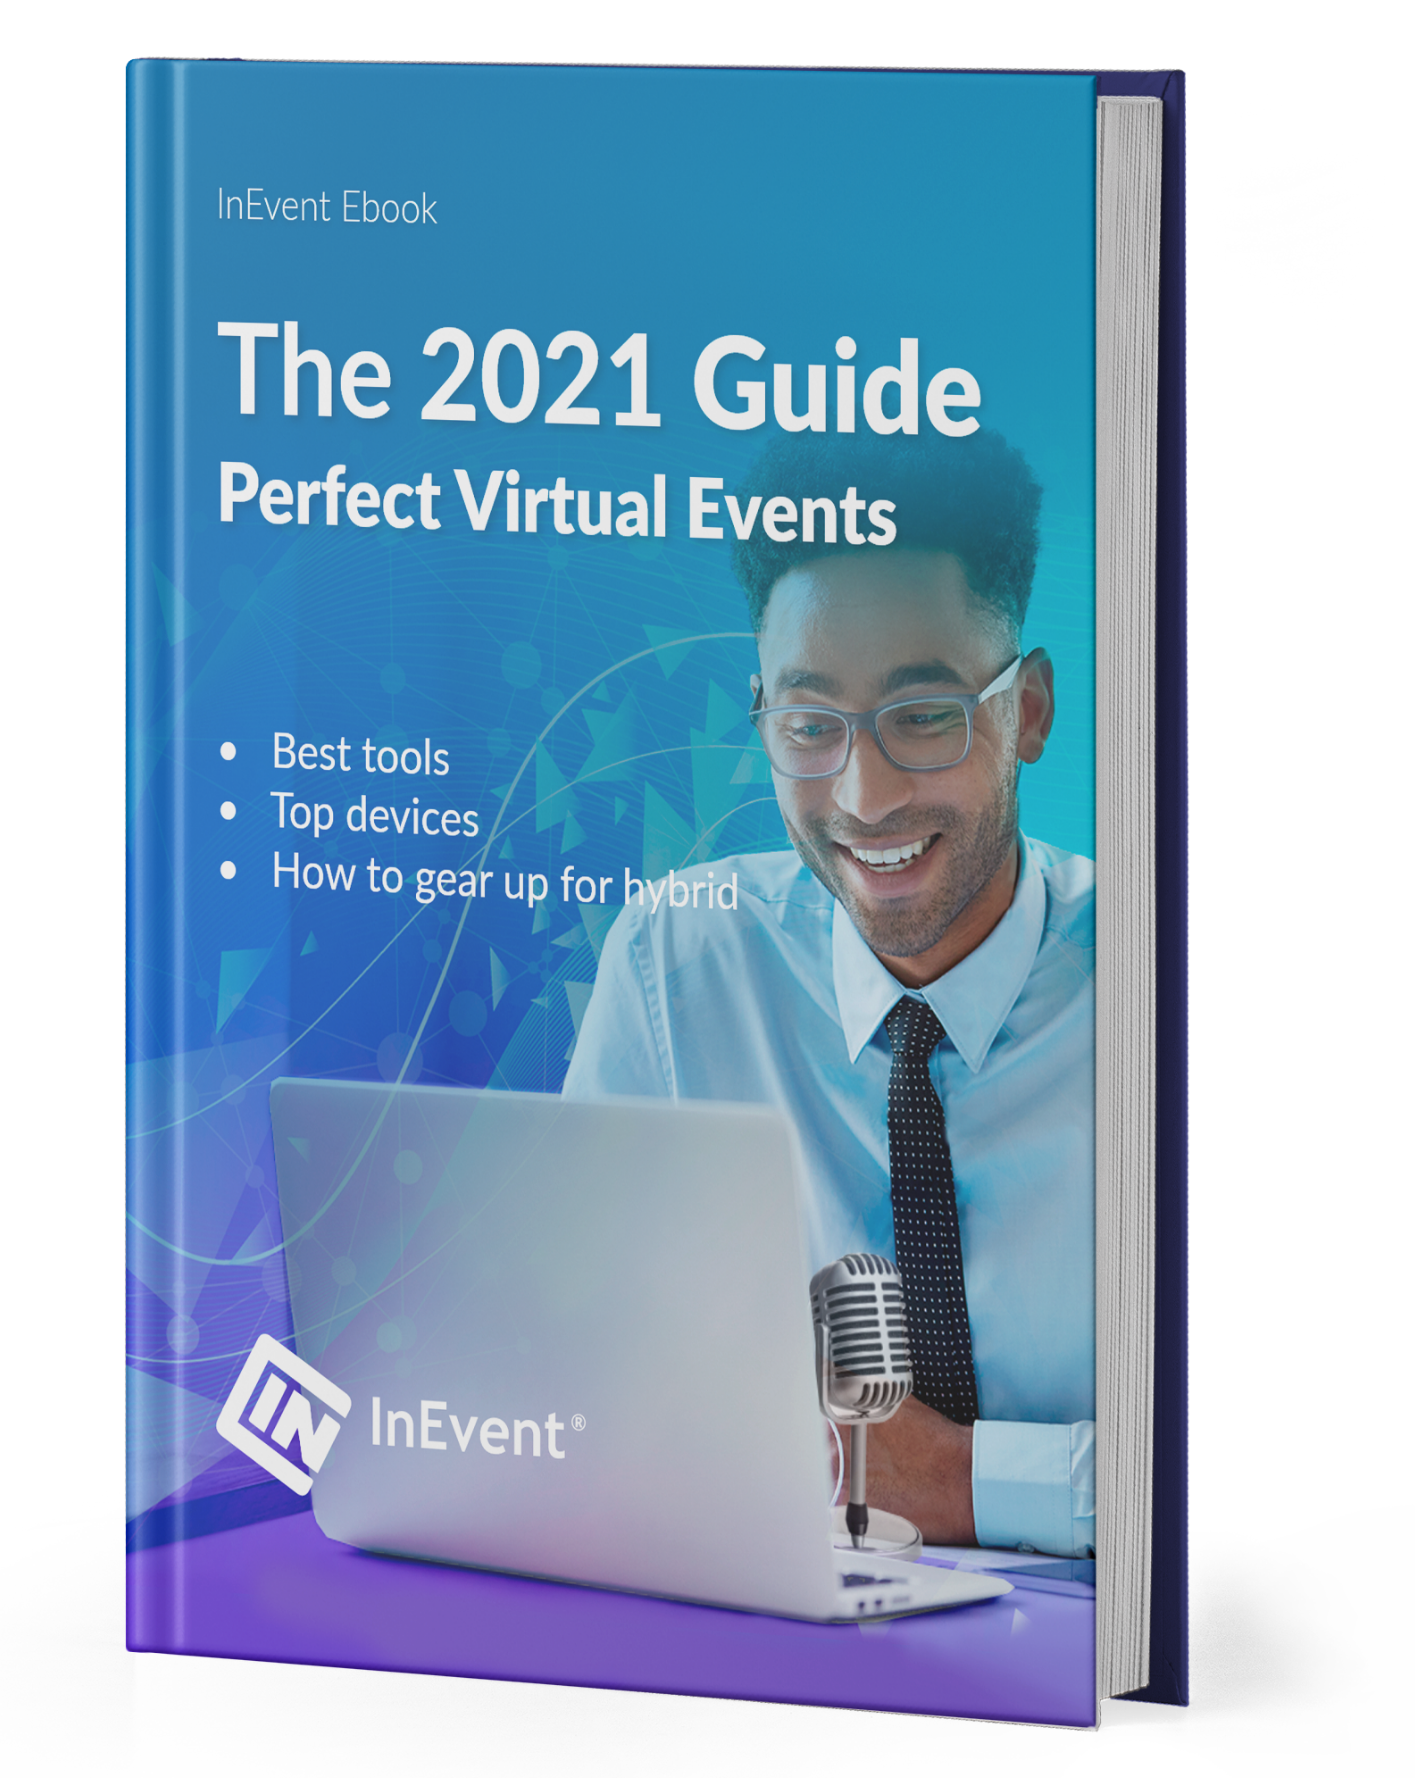 The 2021 Guide for Perfect Virtual Events